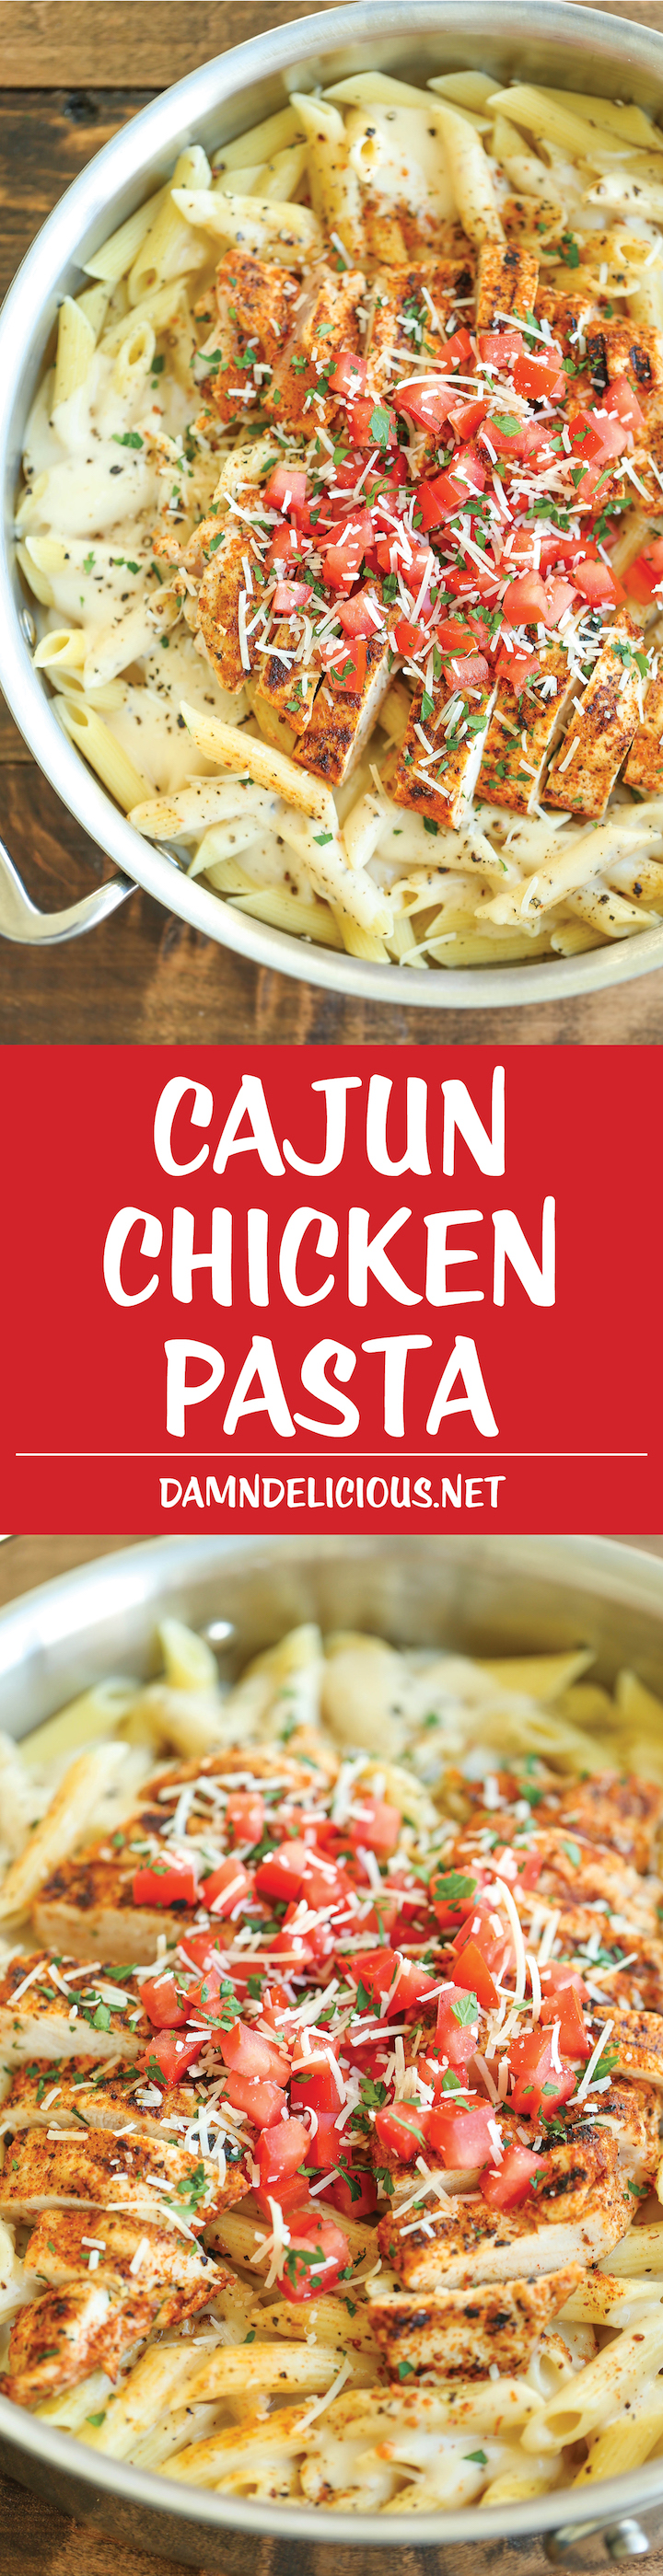 Cajun Chicken Pasta - Chili's copycat recipe made at home with an amazingly creamy melt-in-your-mouth alfredo sauce. And you know it tastes 10000x better!